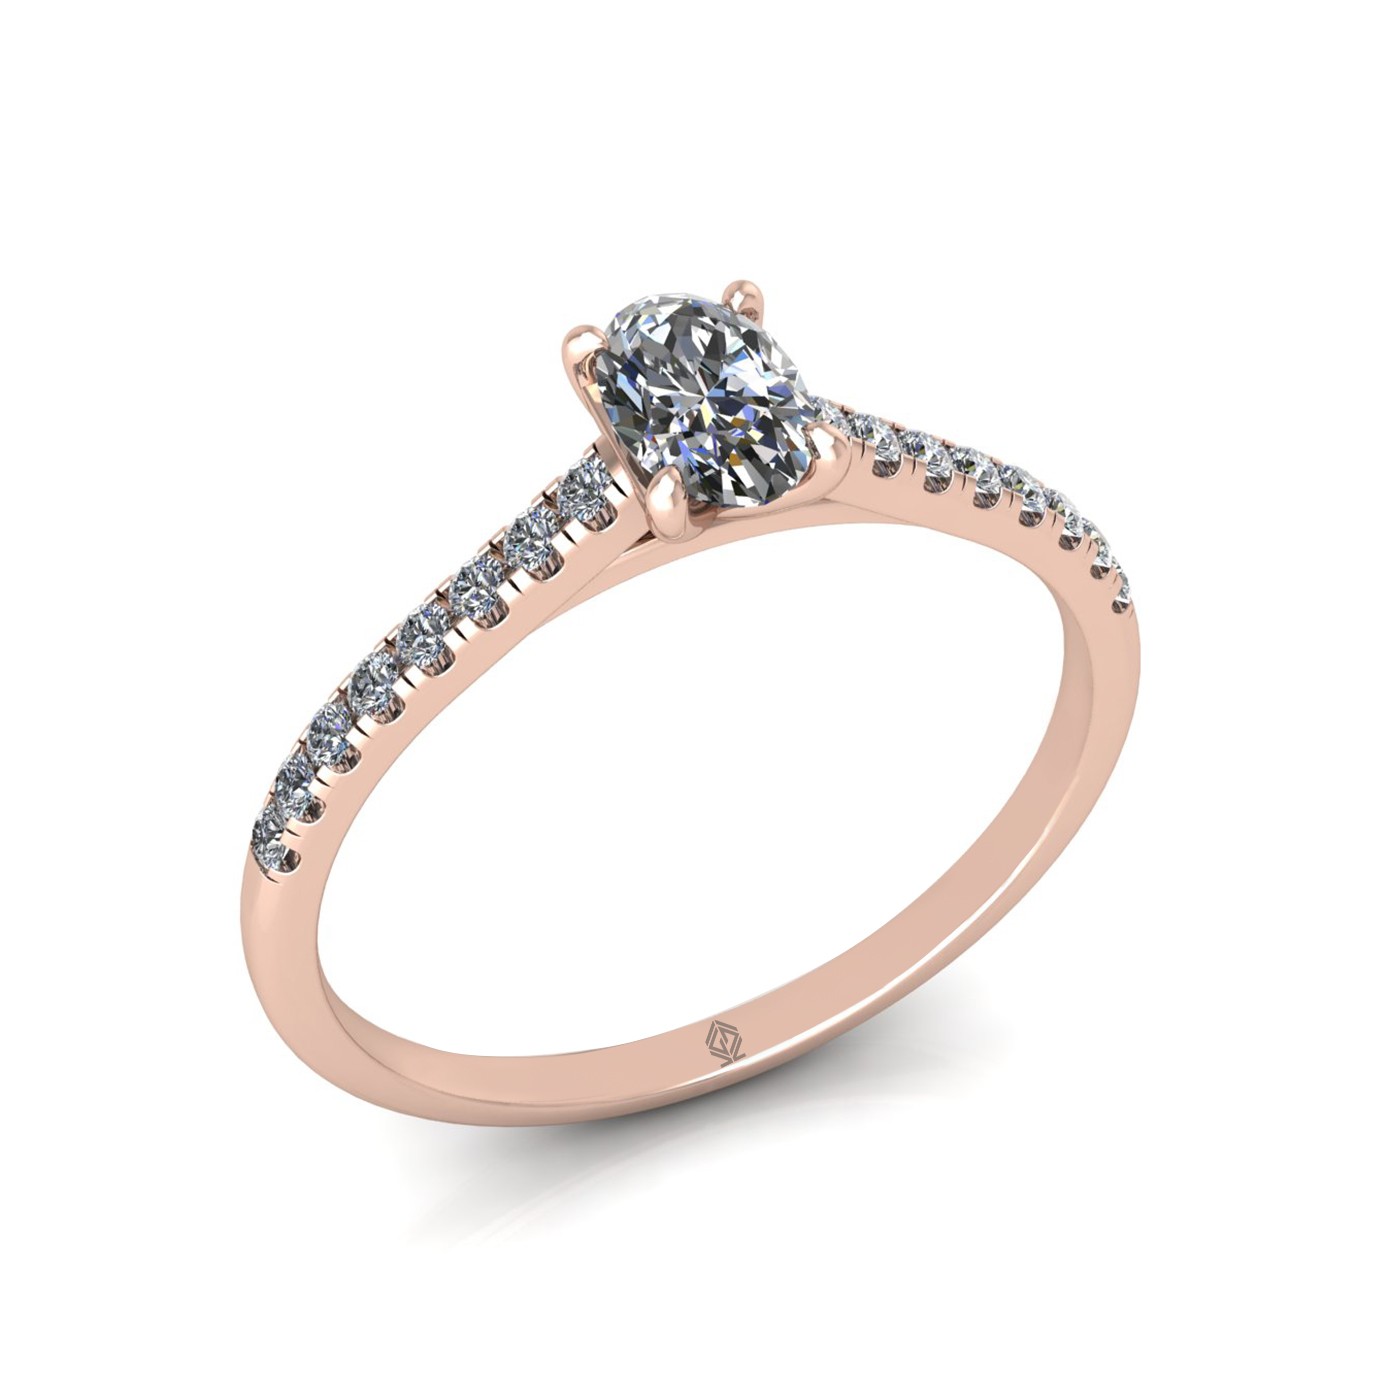 18k rose gold  0,30 ct 4 prongs oval cut diamond engagement ring with whisper thin pavÉ set band